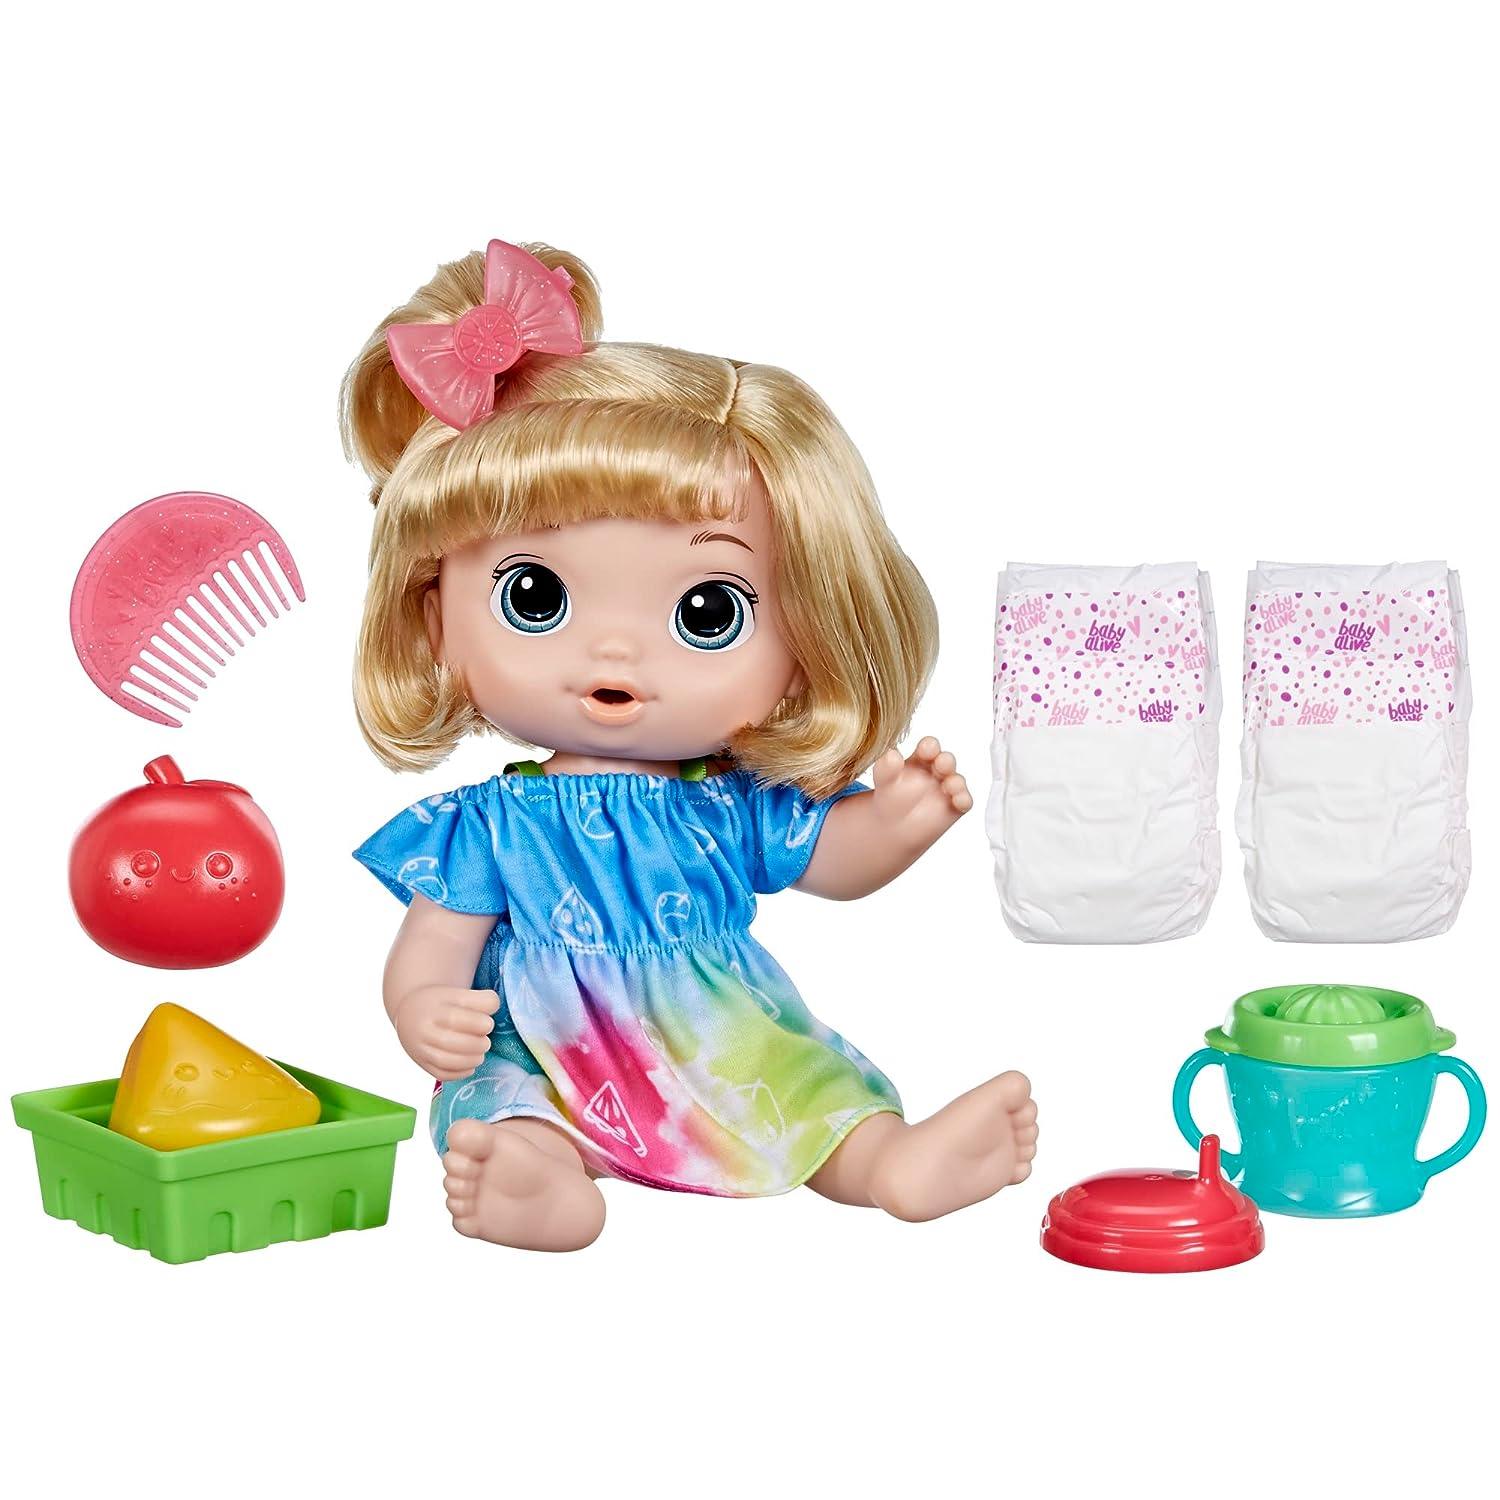 Import Baby Alive Baby Gomago Baby Alive Lil Sips India